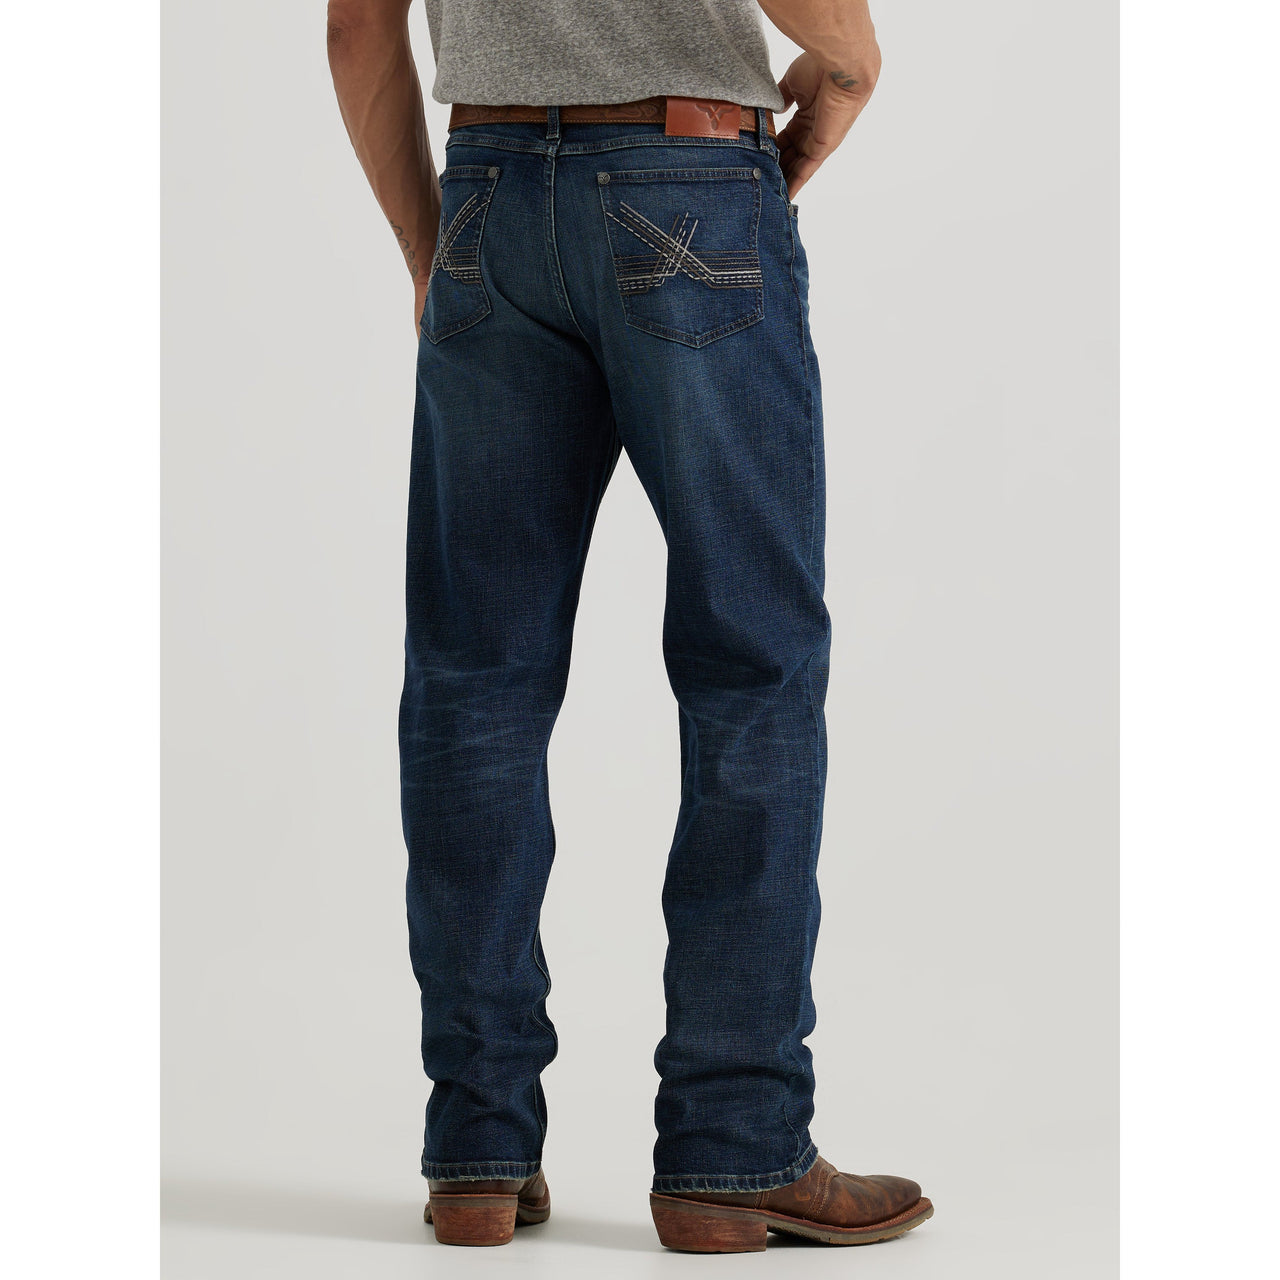 Wrangler Men's 20X Extreme Relaxed Jeans - Sunnybrook